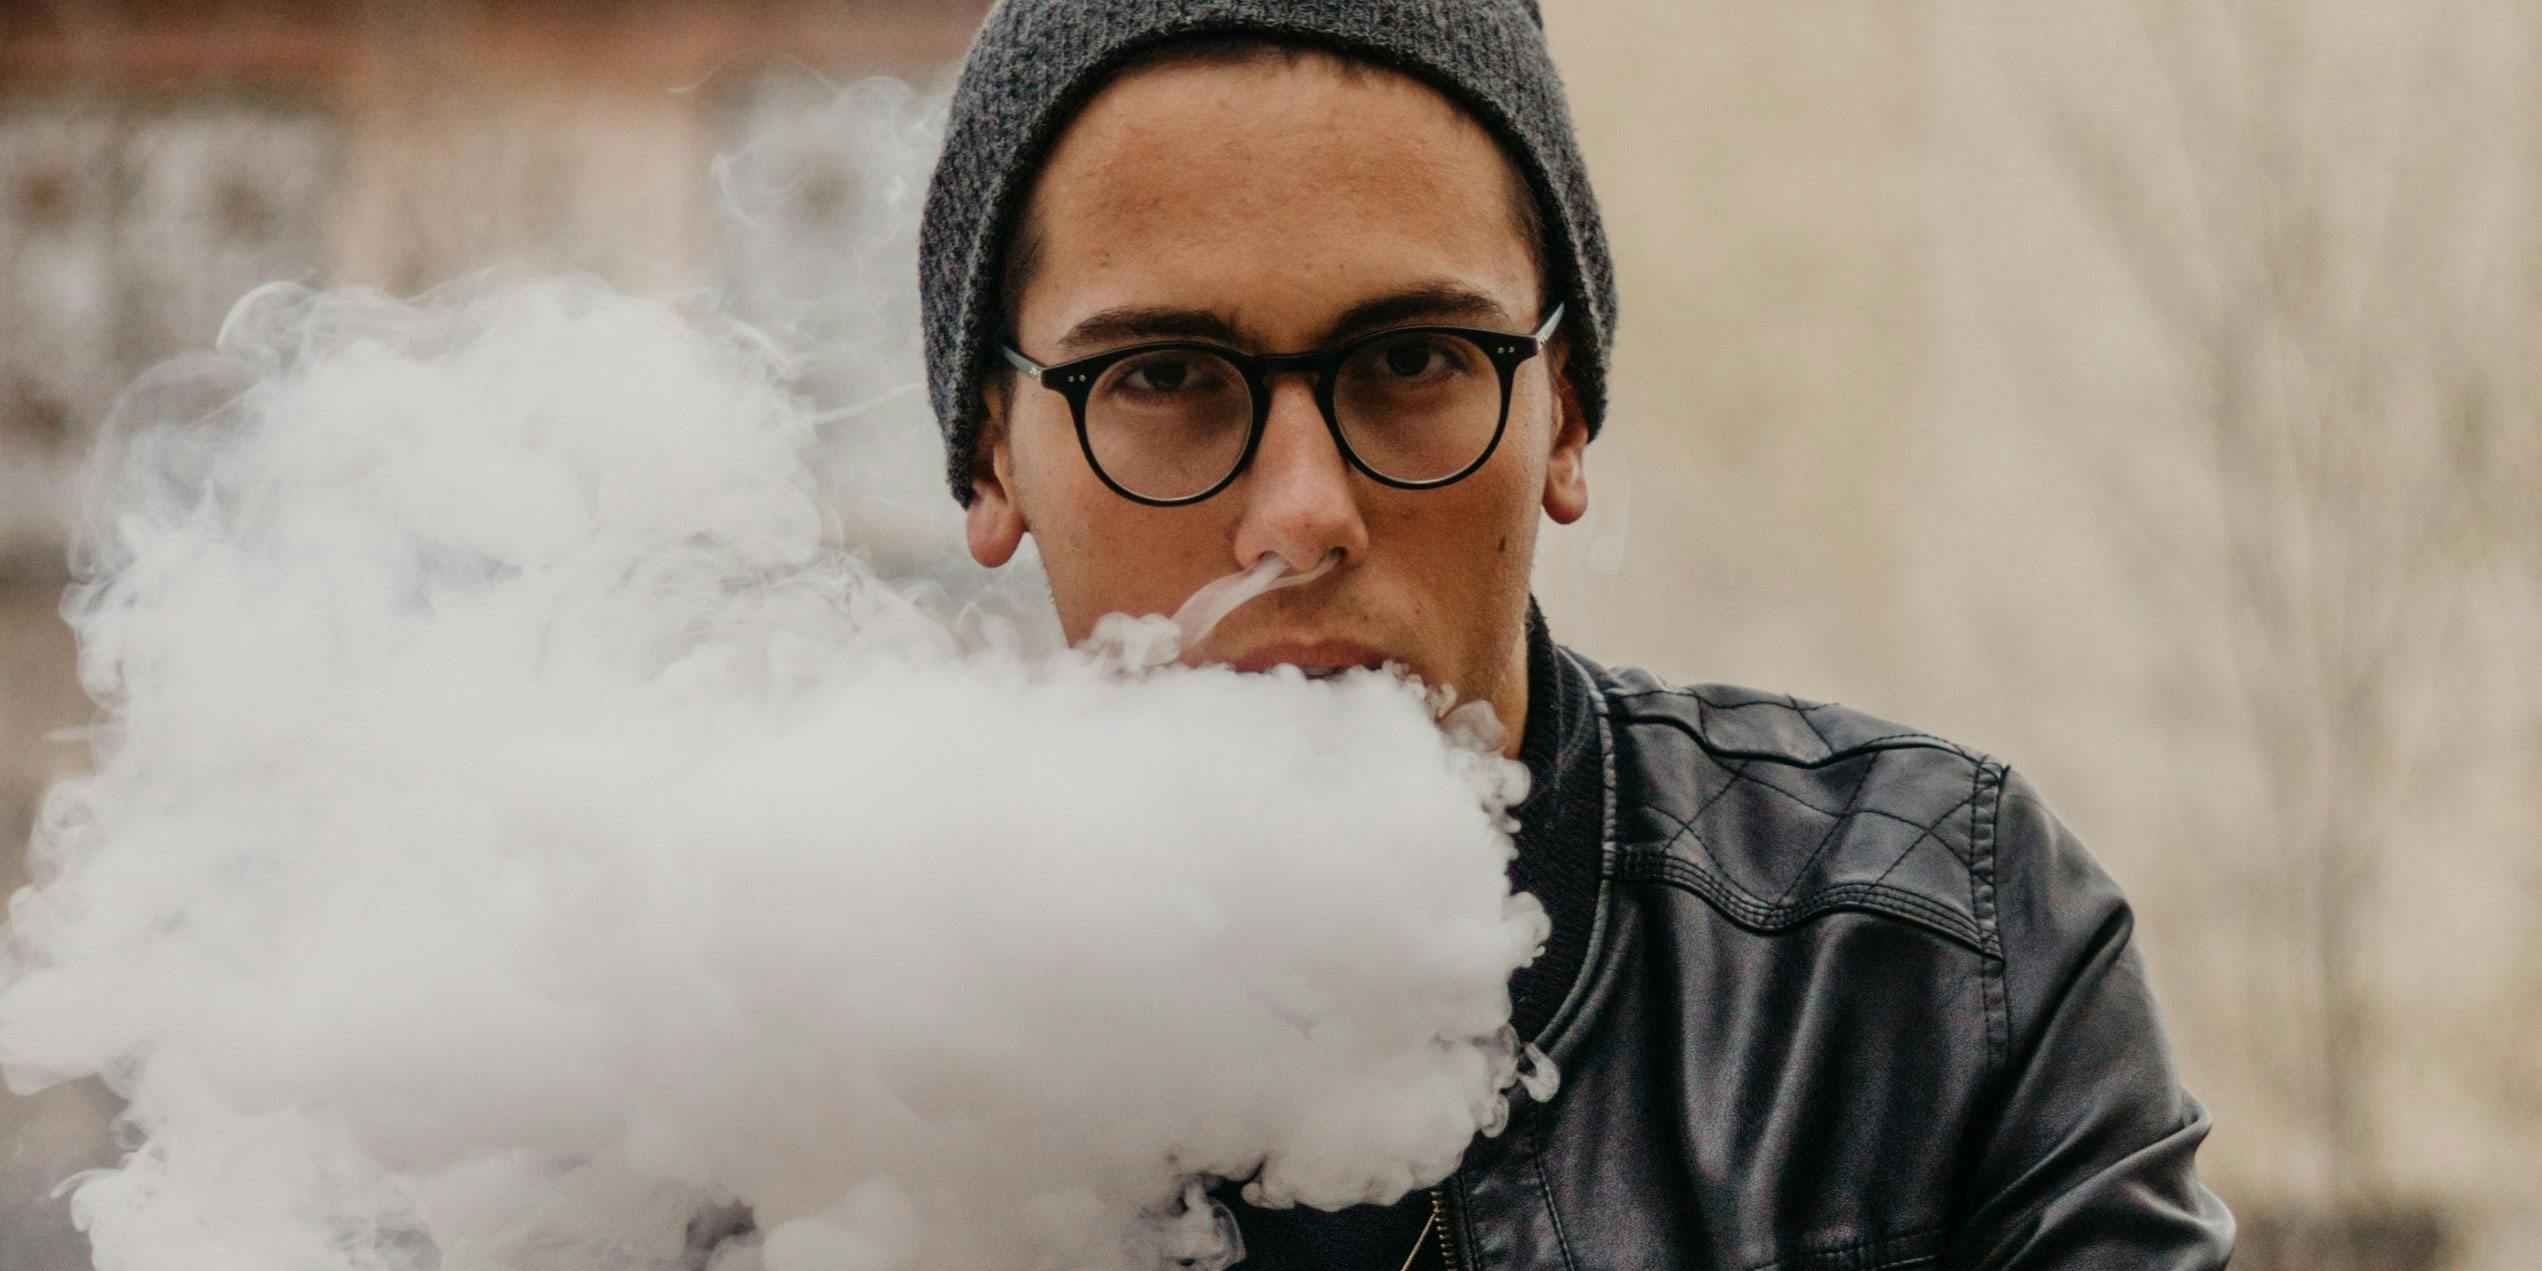 Teens vape cannabis using e-cigarettes. In this photo, a young man is shown blowing smoke.